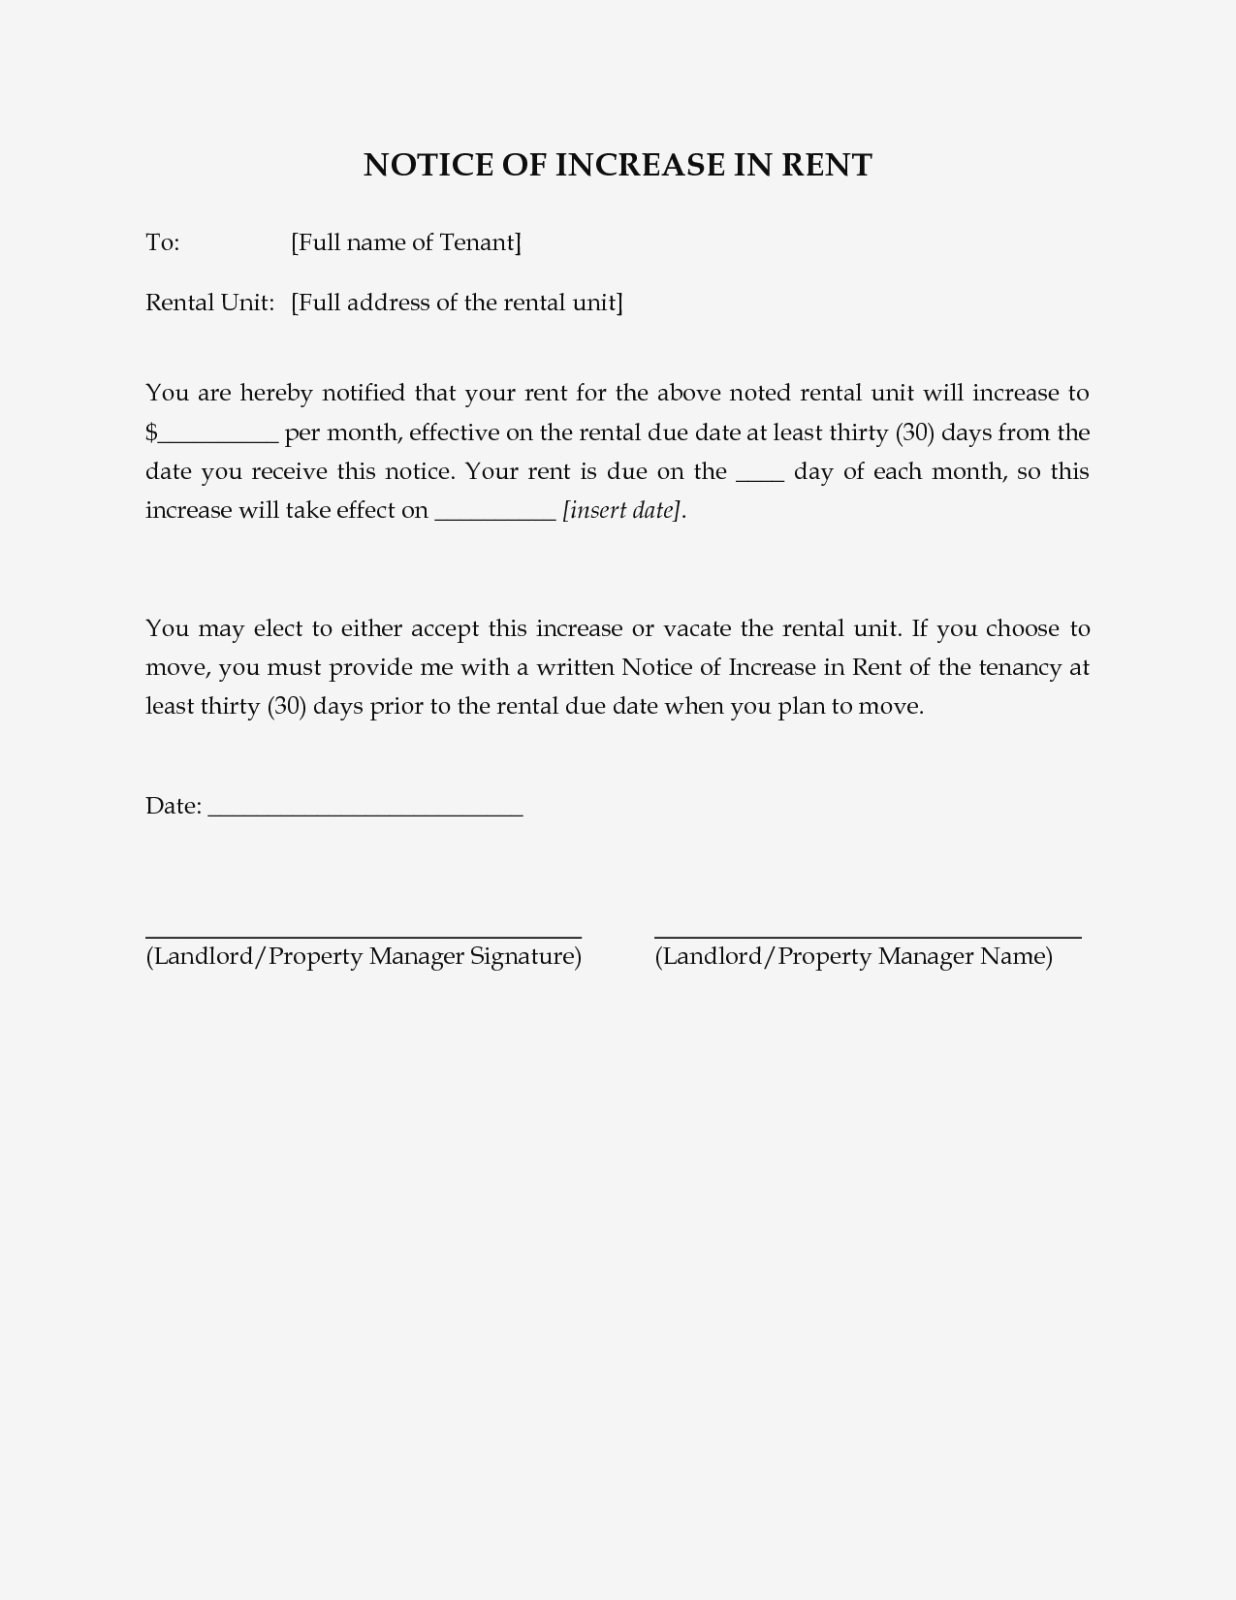 Free Printable Rent Increase Letter | Sample Documents – Free - Free Printable Rent Increase Letter